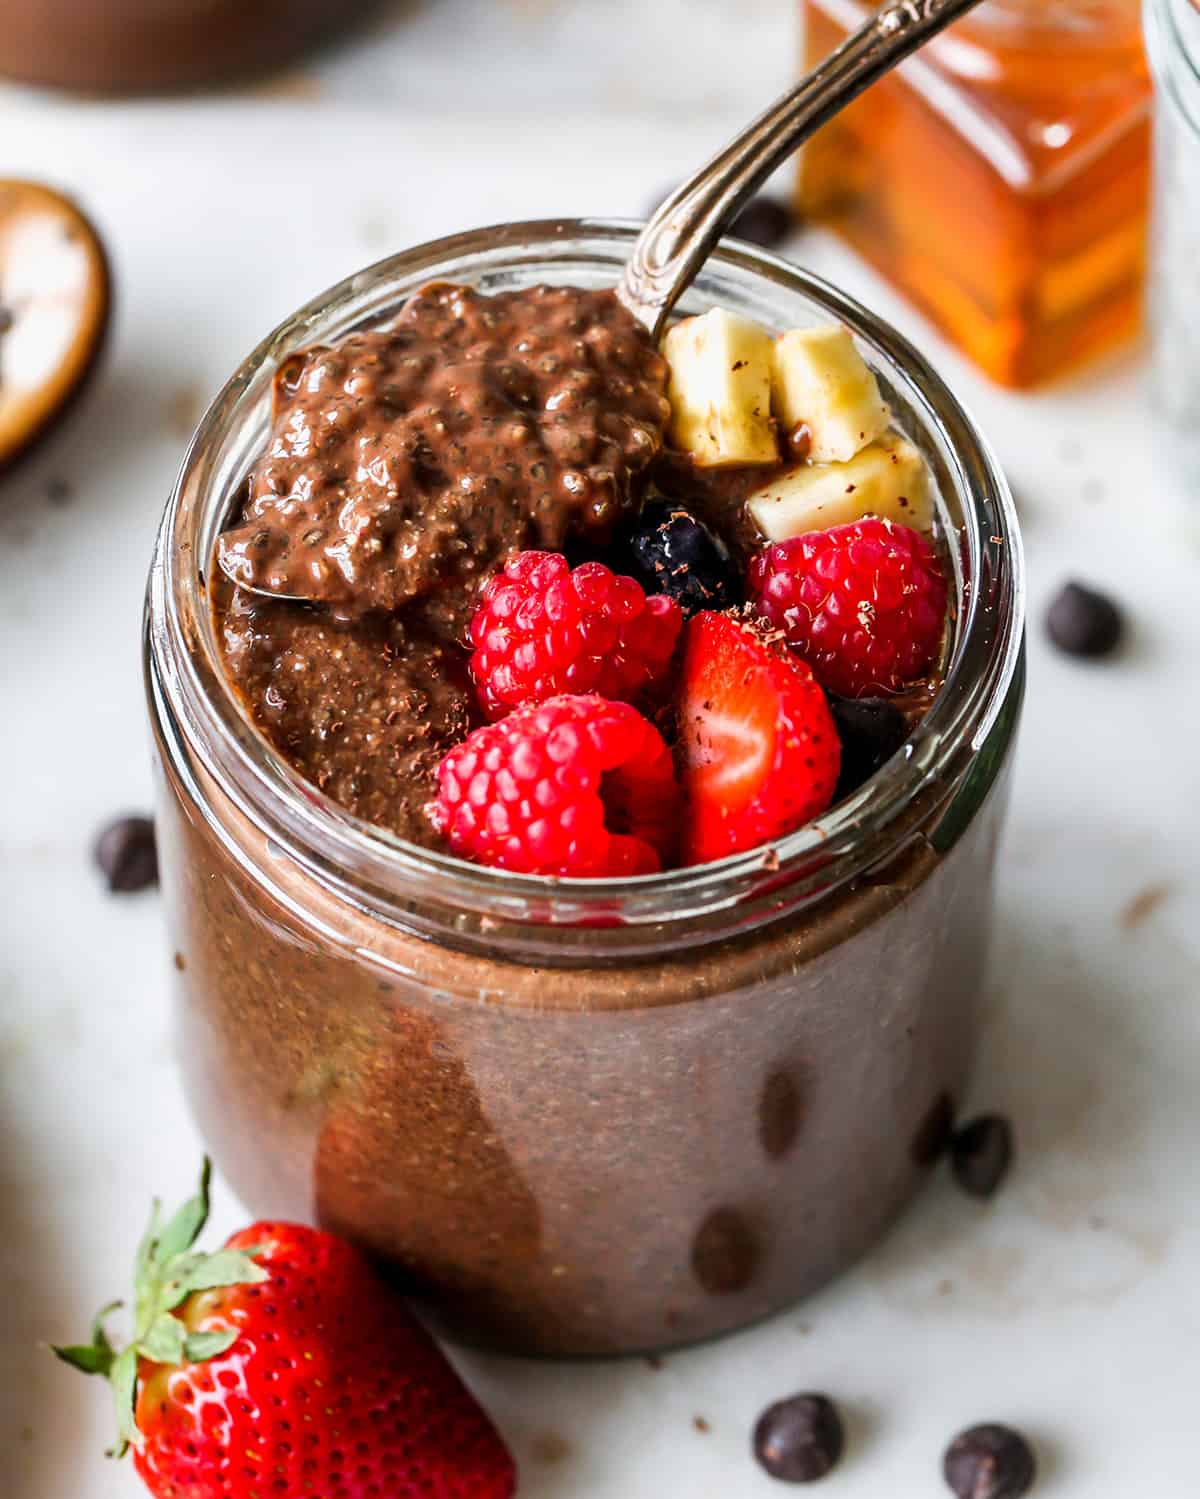 up close photo of a spoon taking a scoop of Chocolate Chia Seed Pudding out of a jar